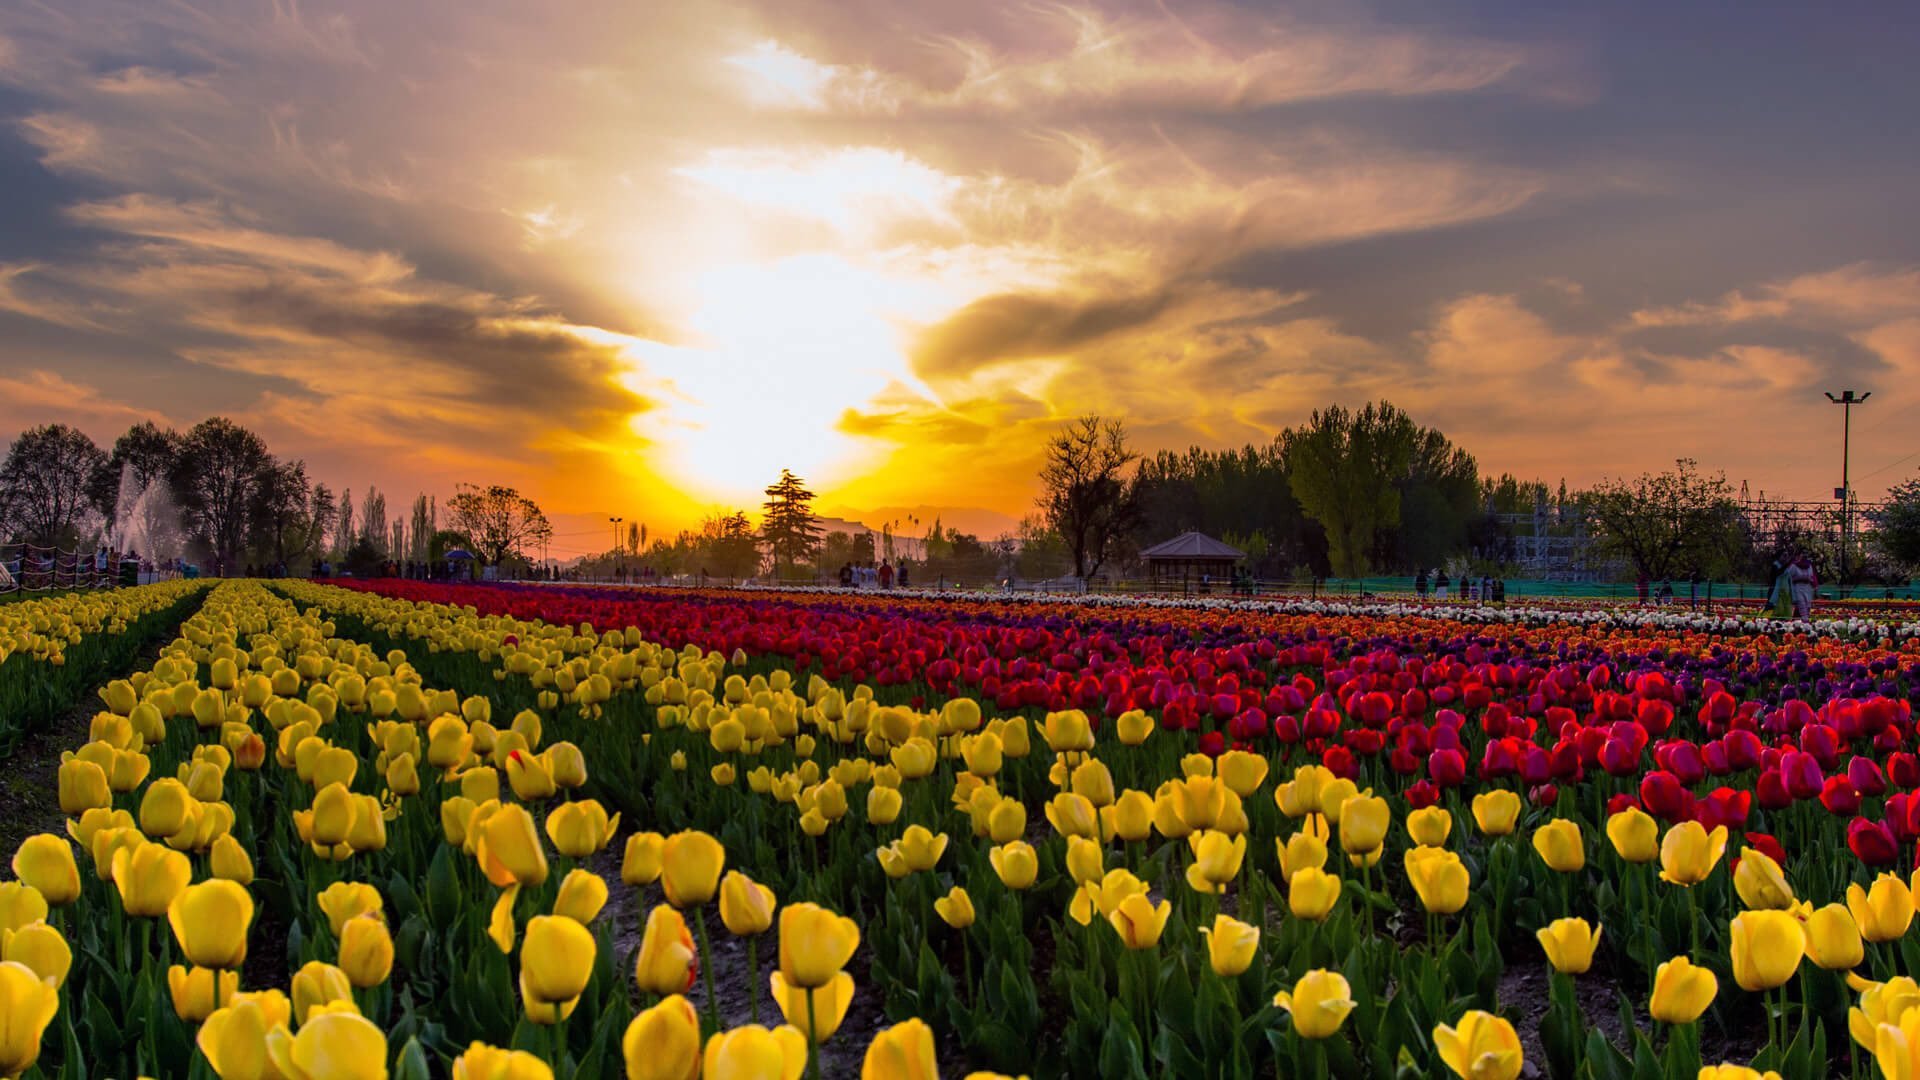 Kashmir is all set to Celebrate a 6day Tulip Festival from 19th March